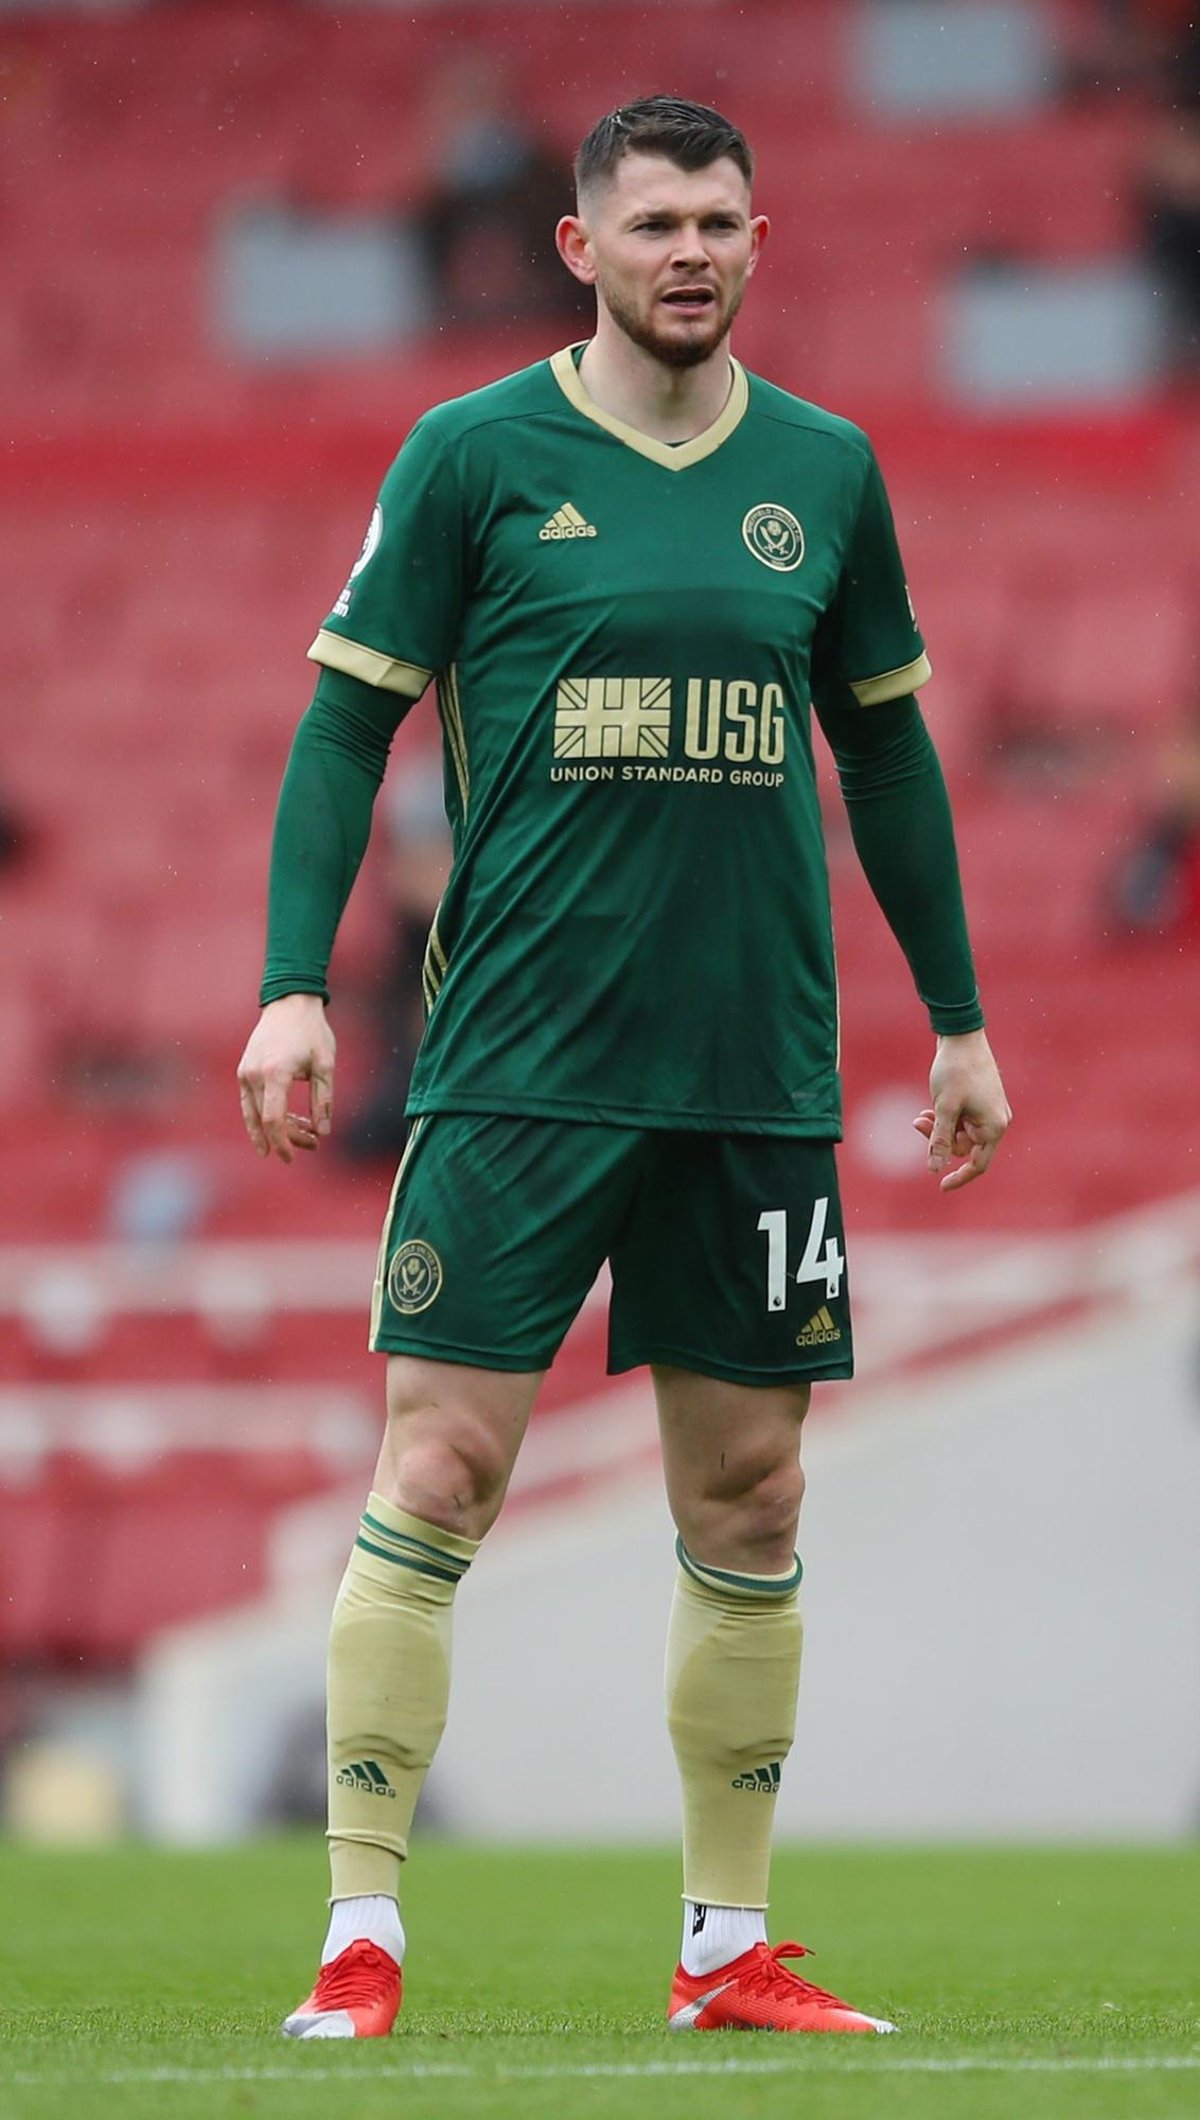 The science behind football kits and why wearing their green shirts at  Liverpool could help Sheffield United spring a major upset